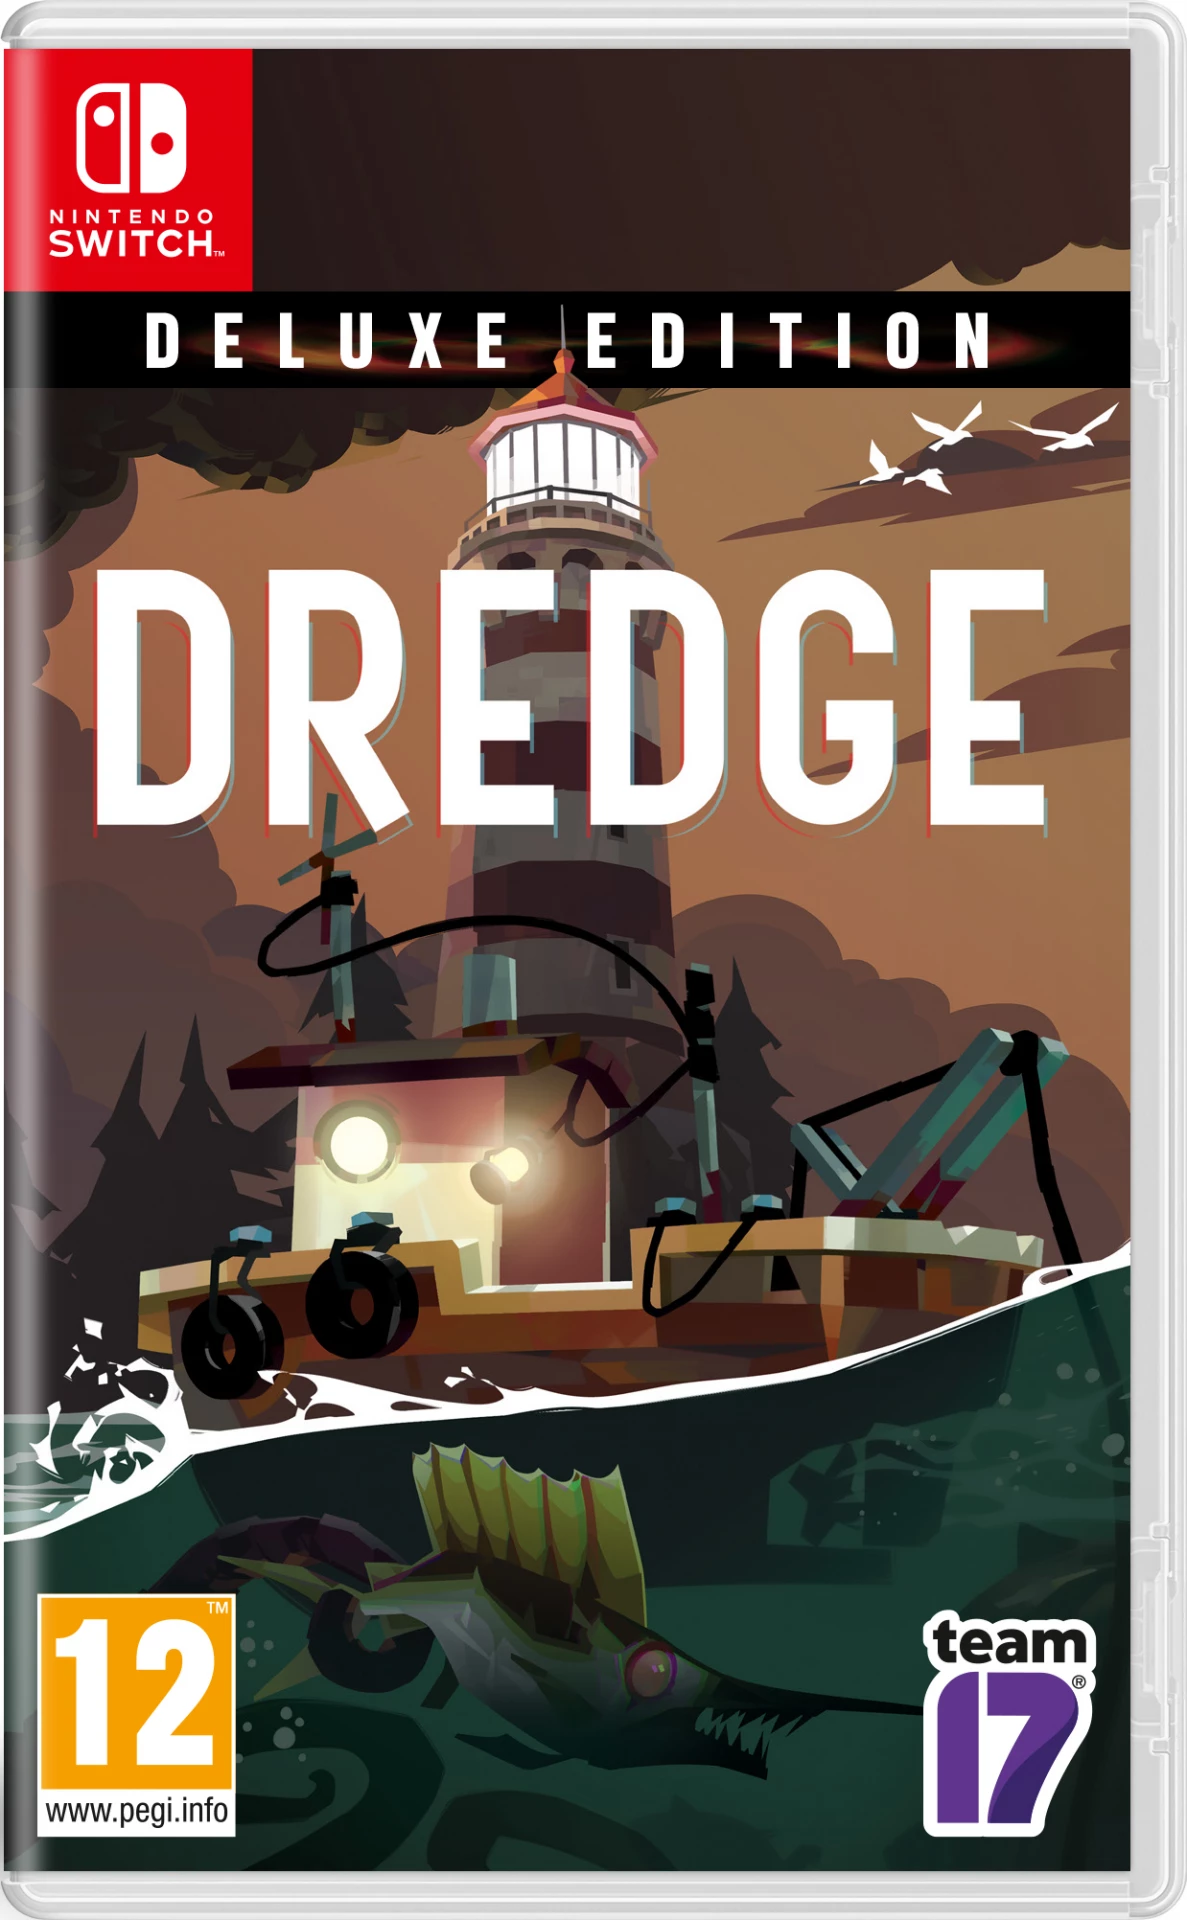 Dredge - Deluxe Edition (Switch), Team 17